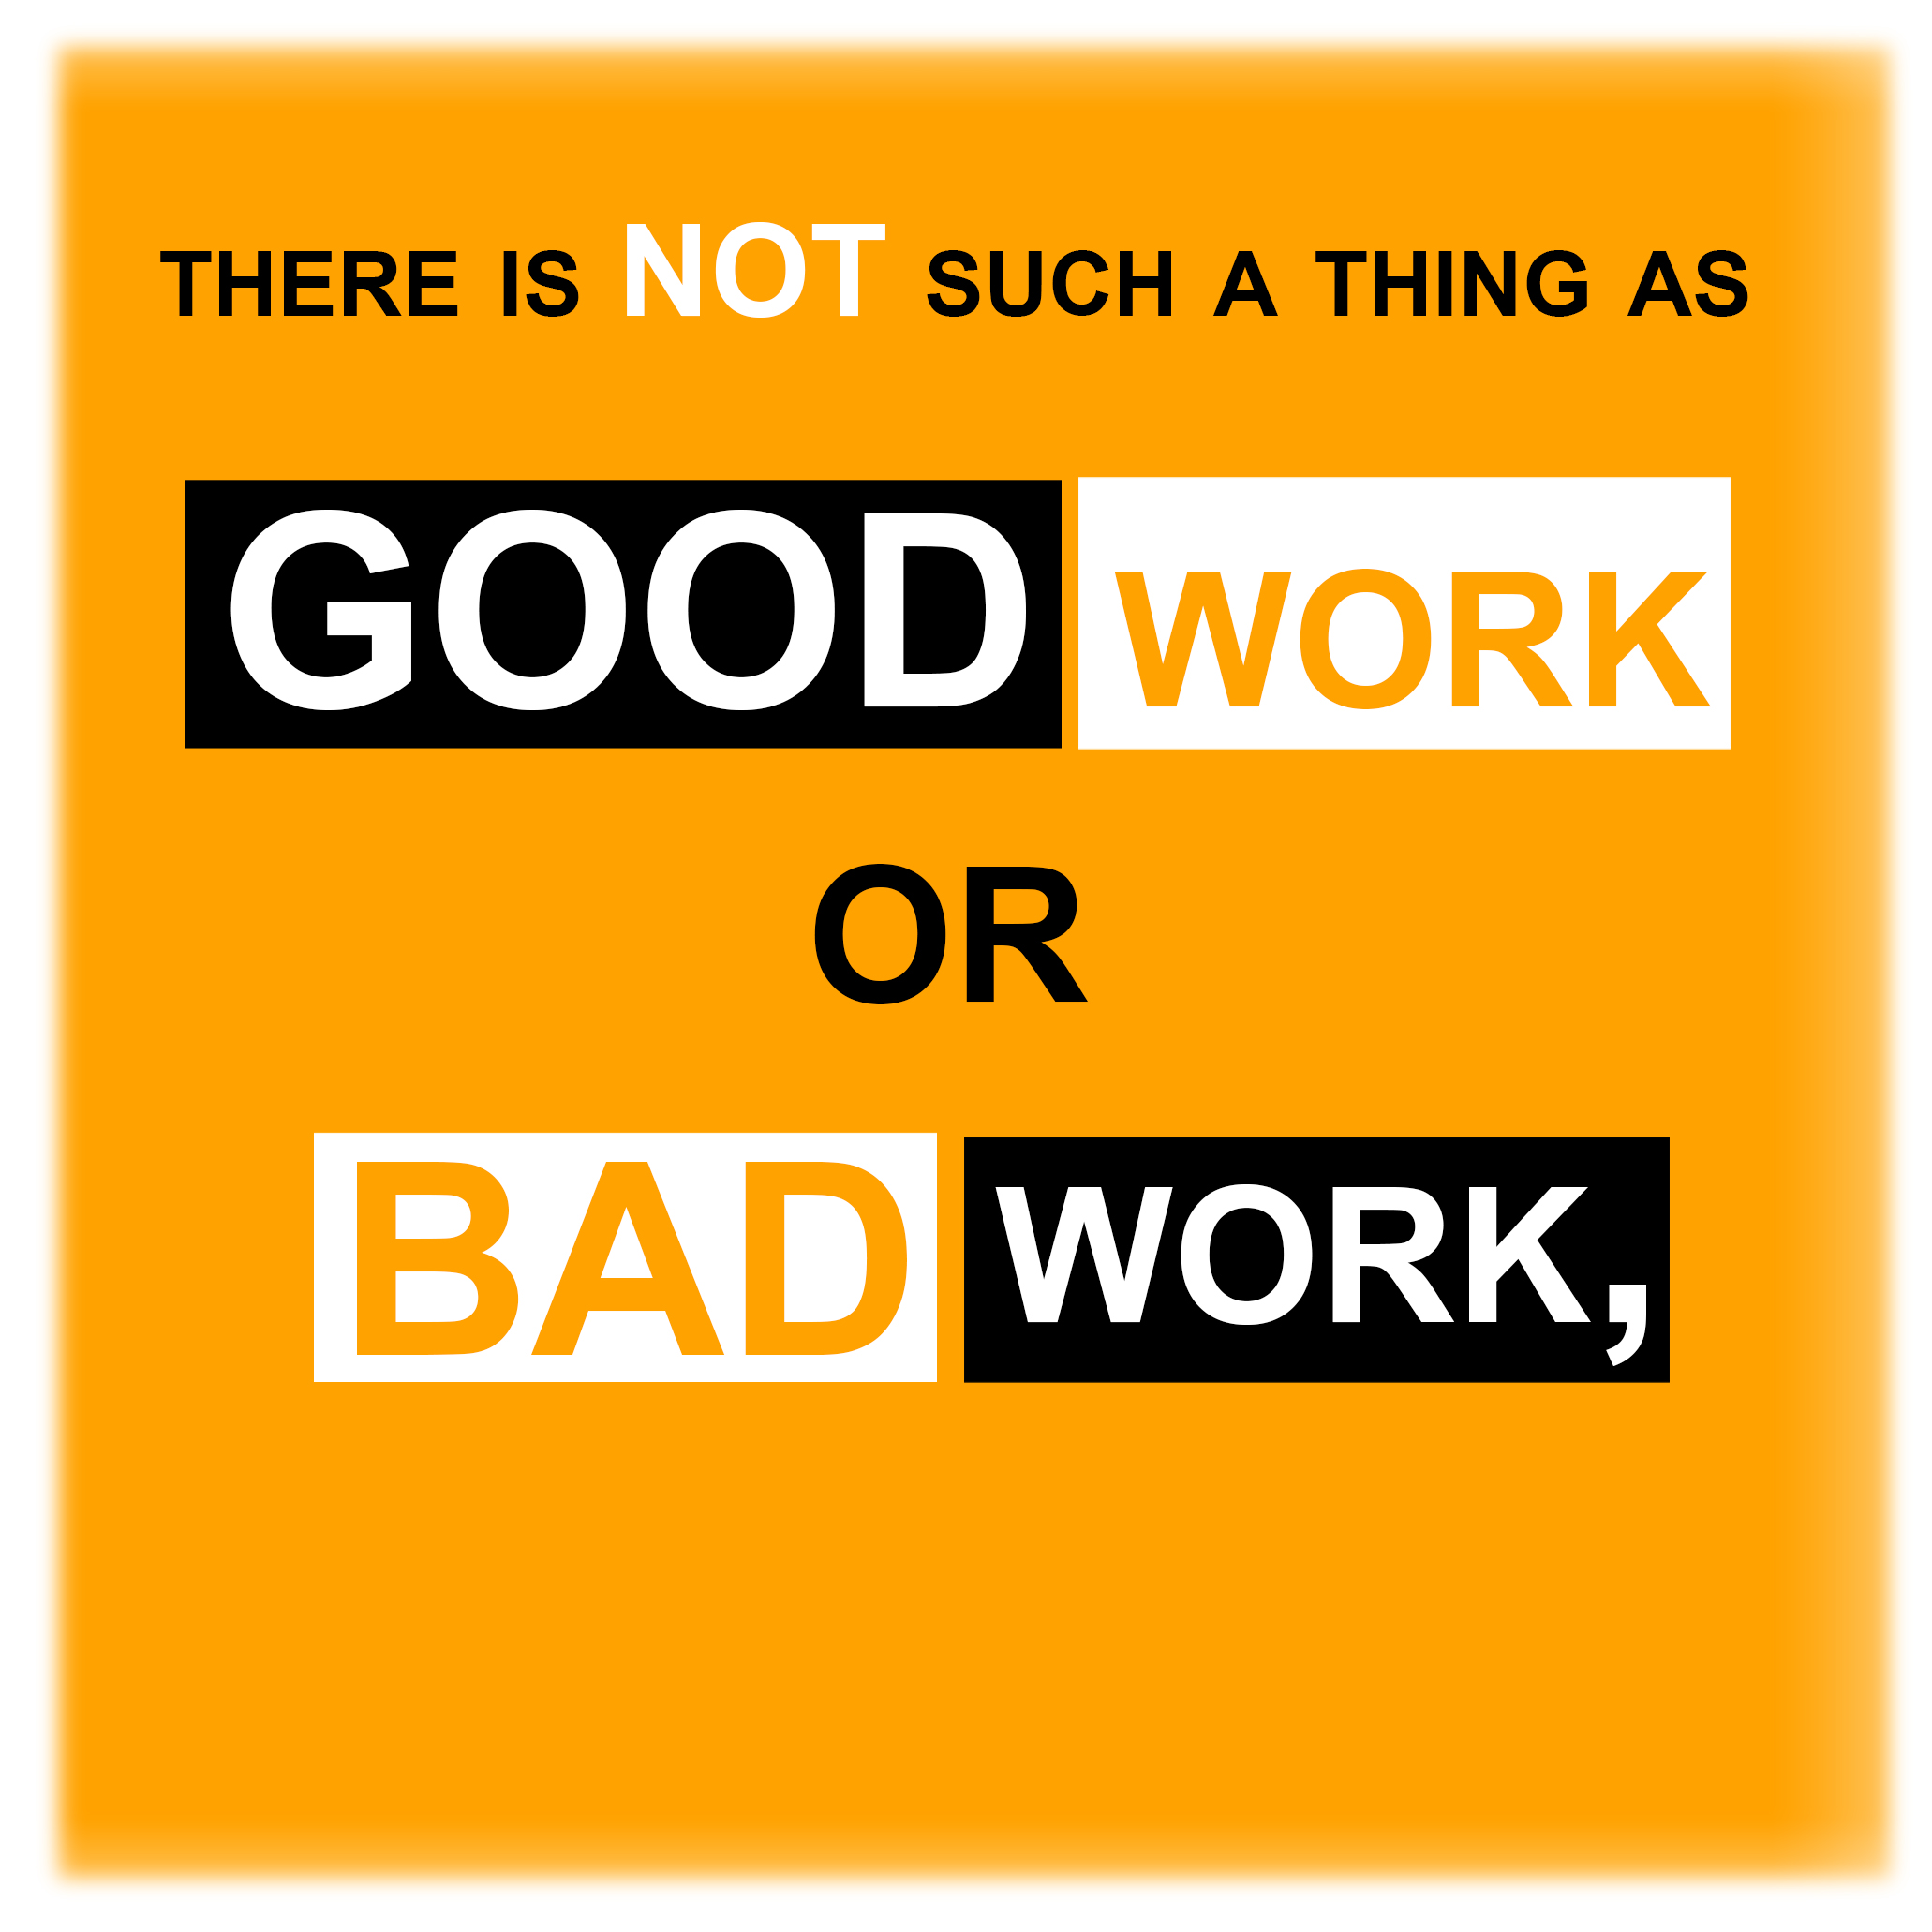 There is not such a thing as good work or bad work